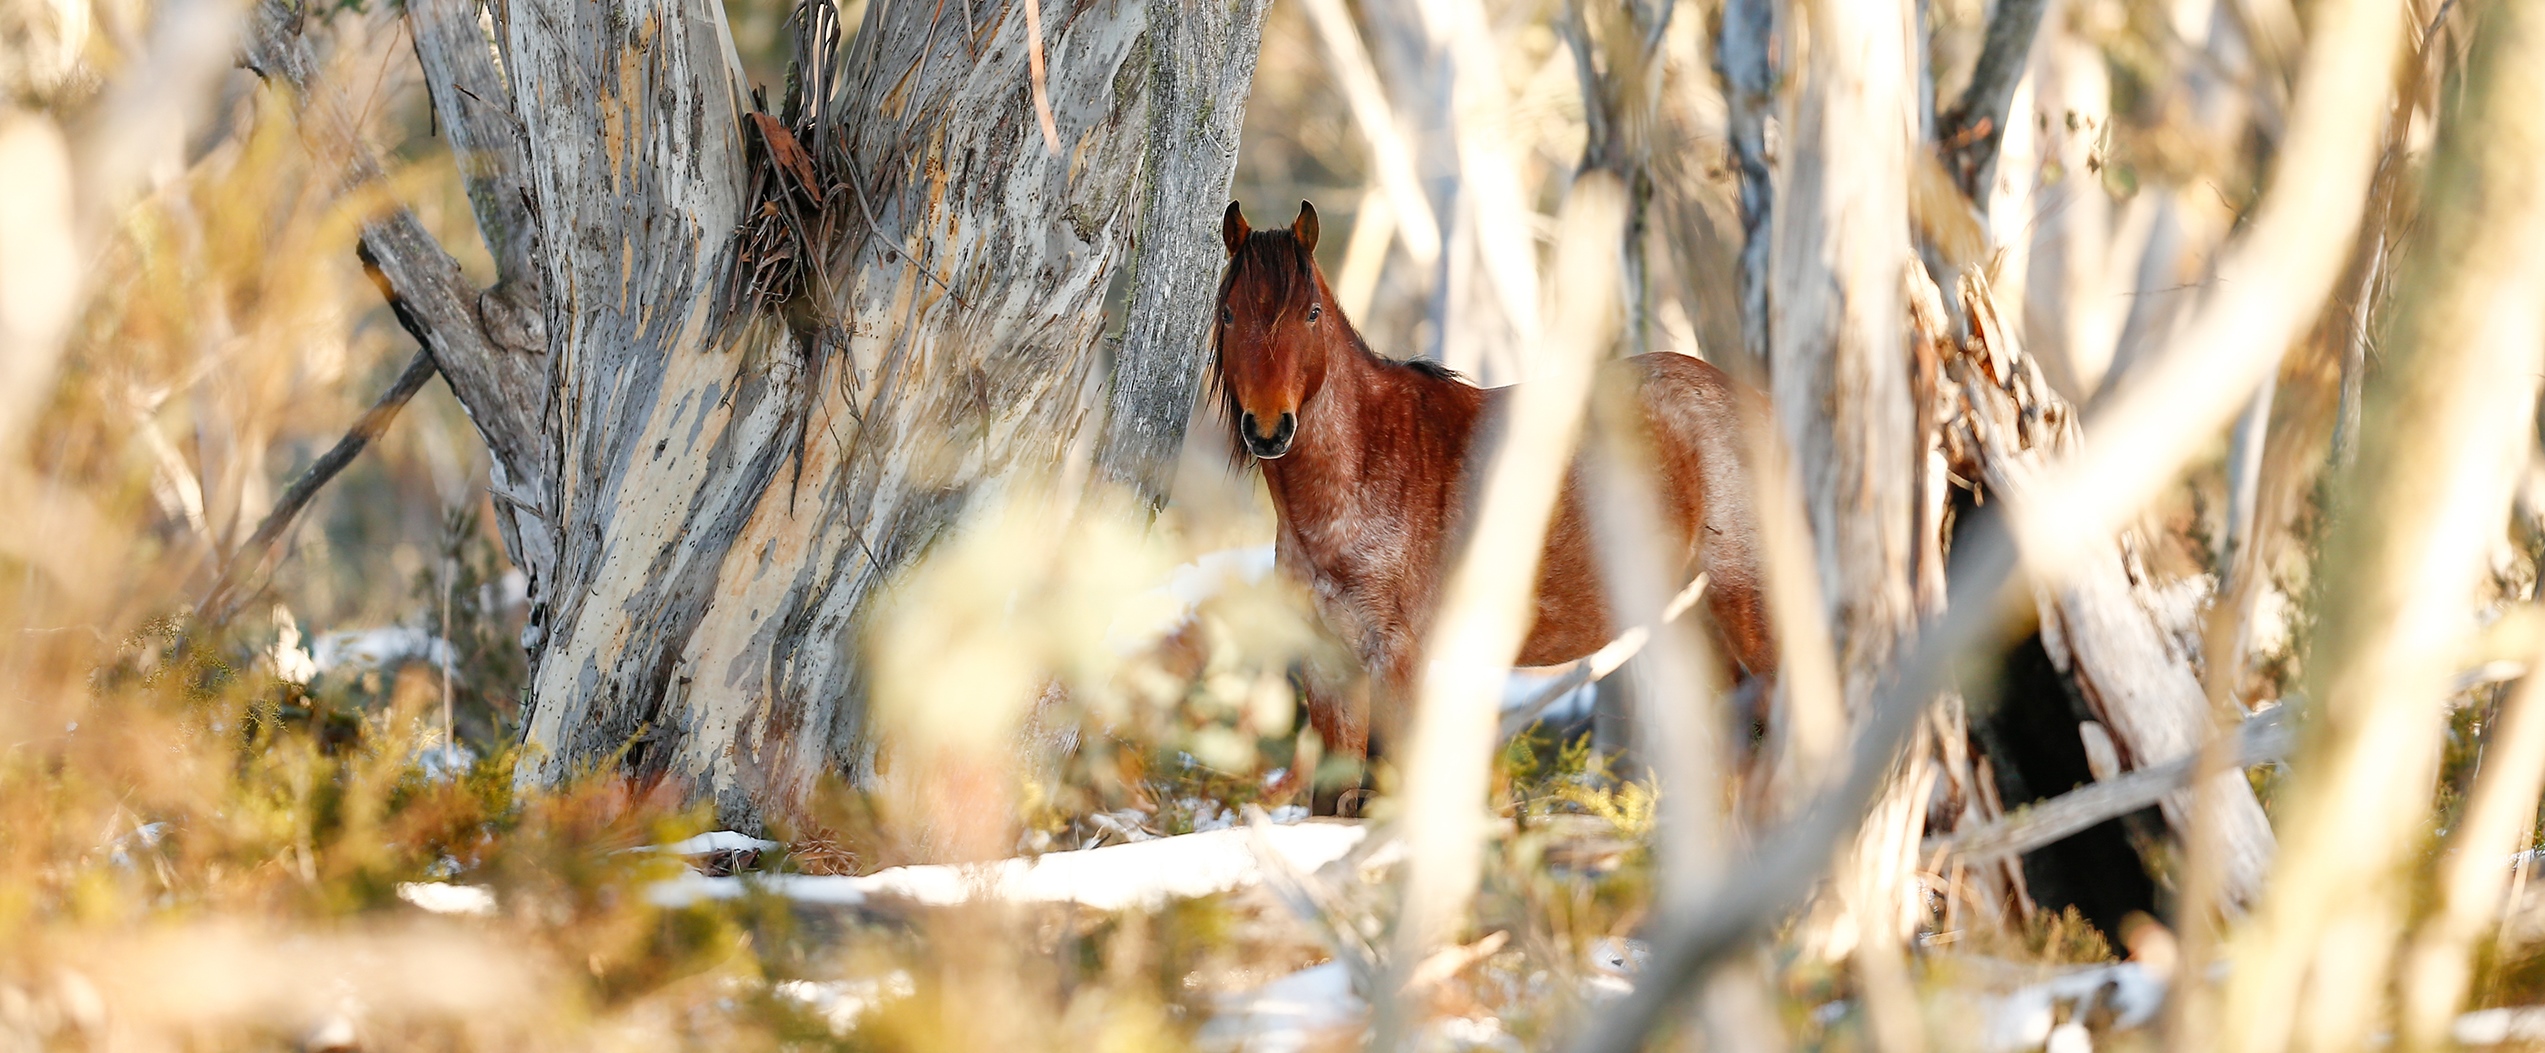 Reunited with the Roan: Australian Snowy Mountains, Wild Horses of the World